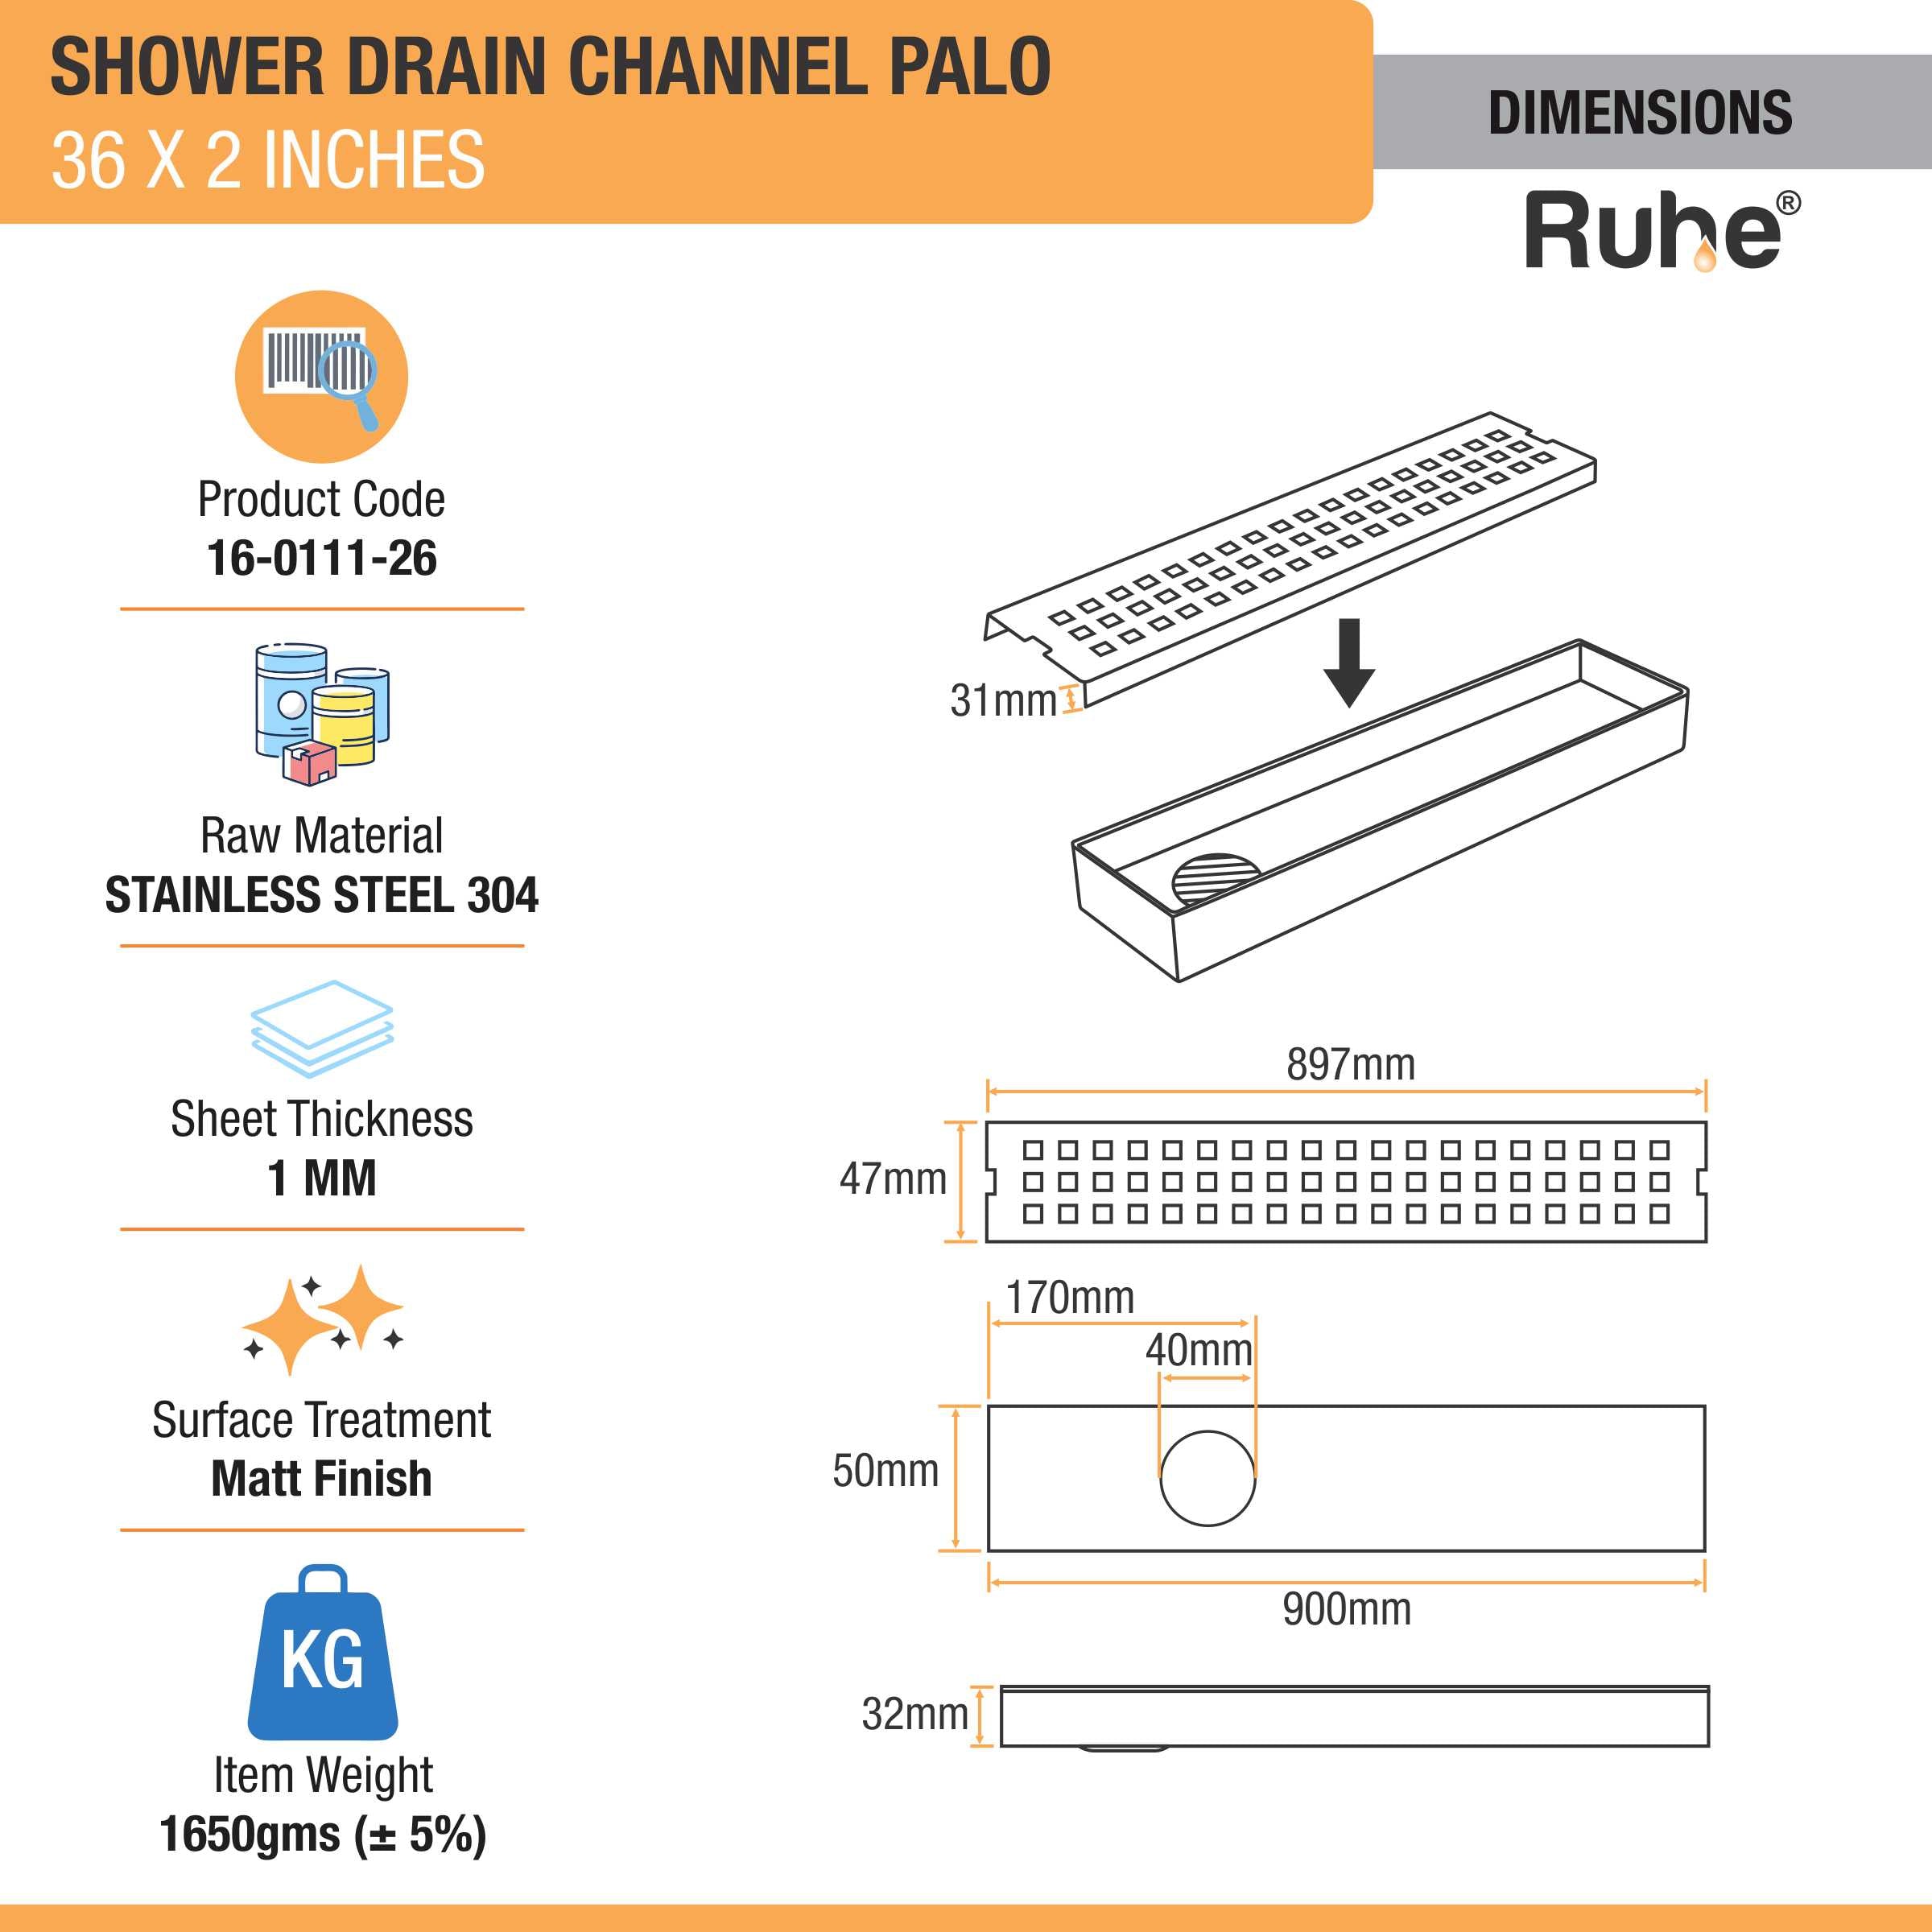 Palo Shower Drain Channel (36 X 2 Inches) (304 Grade) dimensions and size